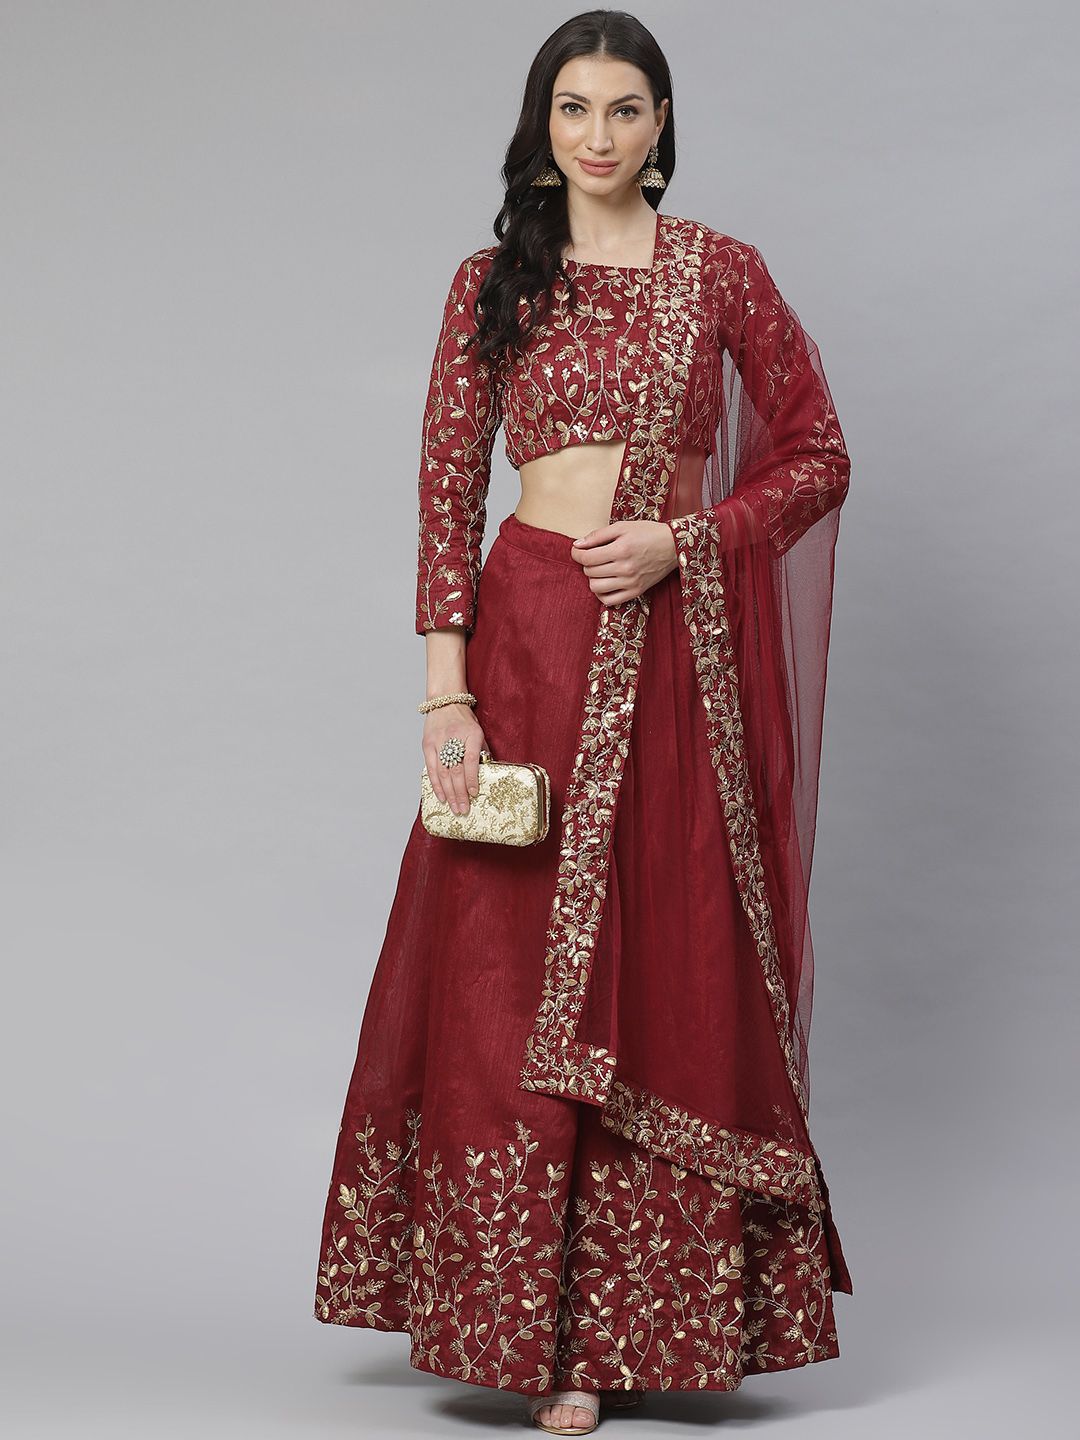 Readiprint Fashions Maroon & Gold-Toned Embroidered Semi-Stitched Lehenga & Unstitched Blouse with Dupatta Price in India